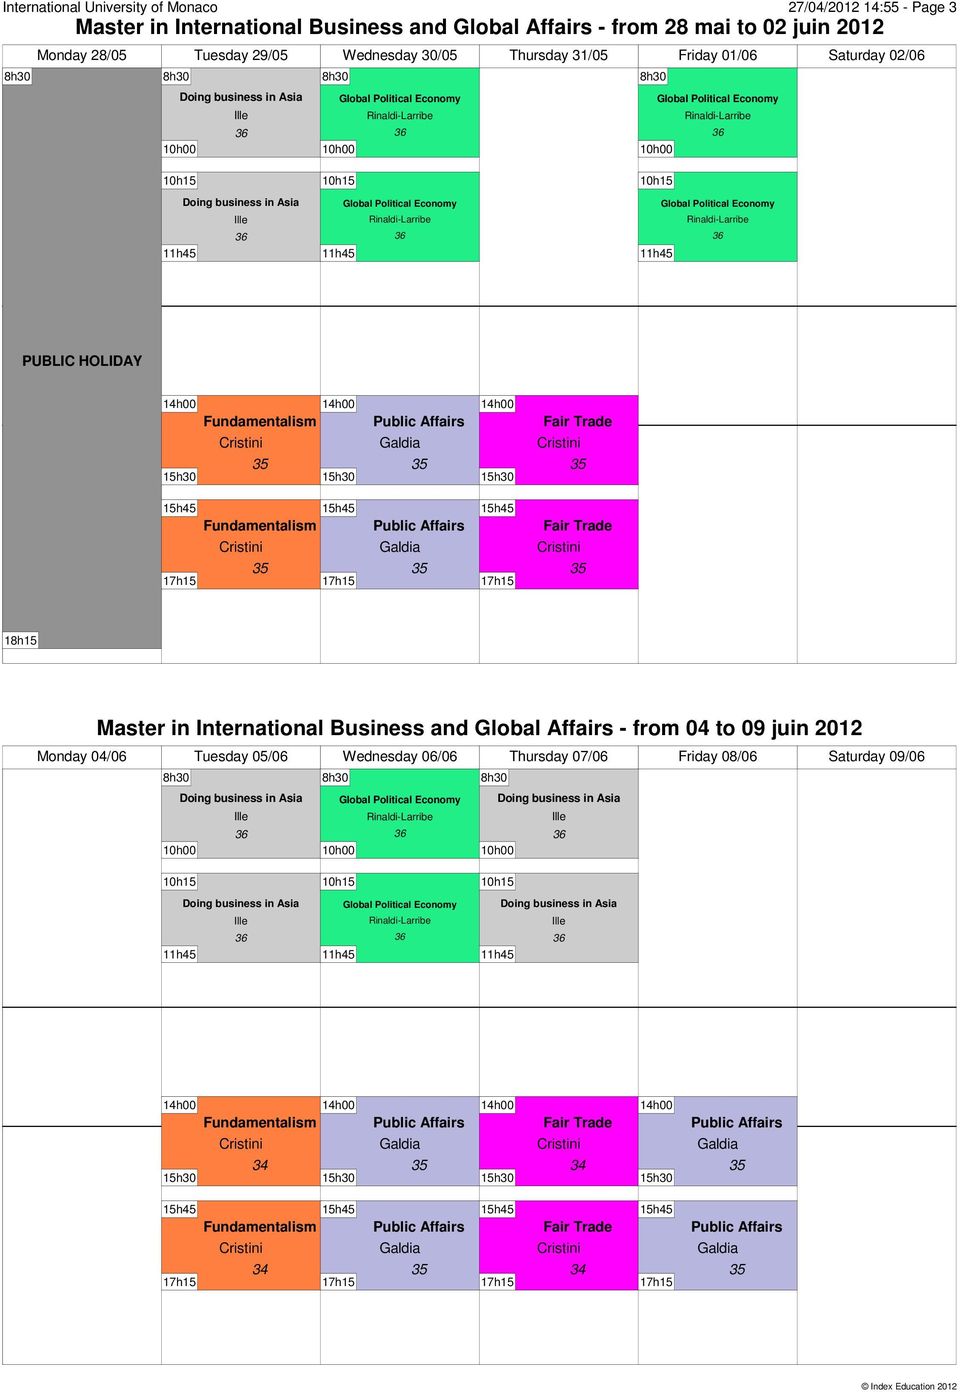 31/05 Friday 01/06 Saturday 02/06 18h15 Master in International Business and Global Affairs -